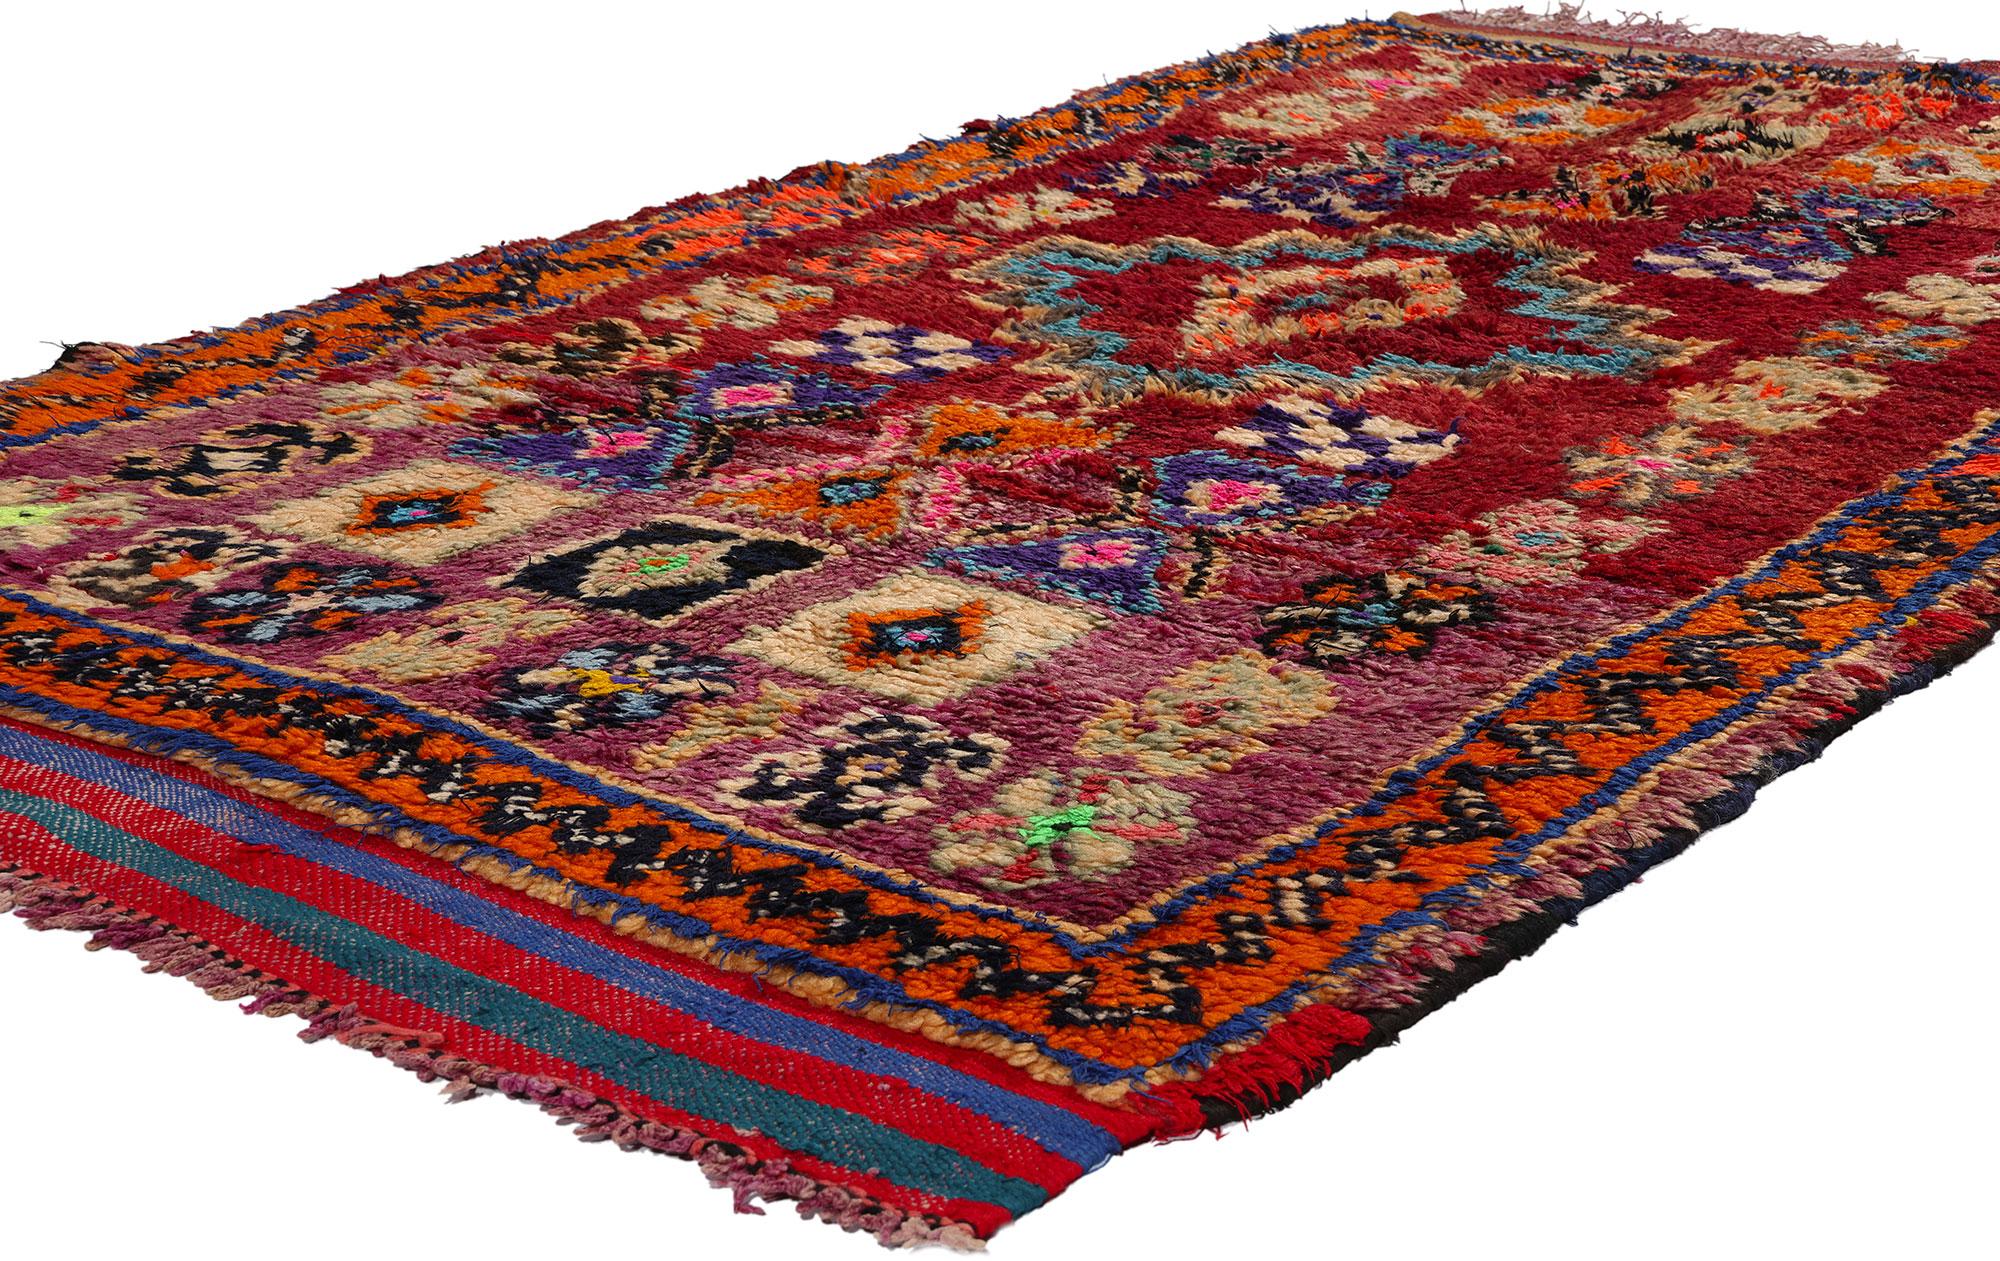 21780 Vintage Red Talsint Moroccan Rug 03'10 x 07'09. Embark on a mesmerizing journey with the beguiling artistry woven into this hand-knotted wool vintage red Talsint Moroccan rug, a treasure that unfolds its tale from the mystical Figuig region in